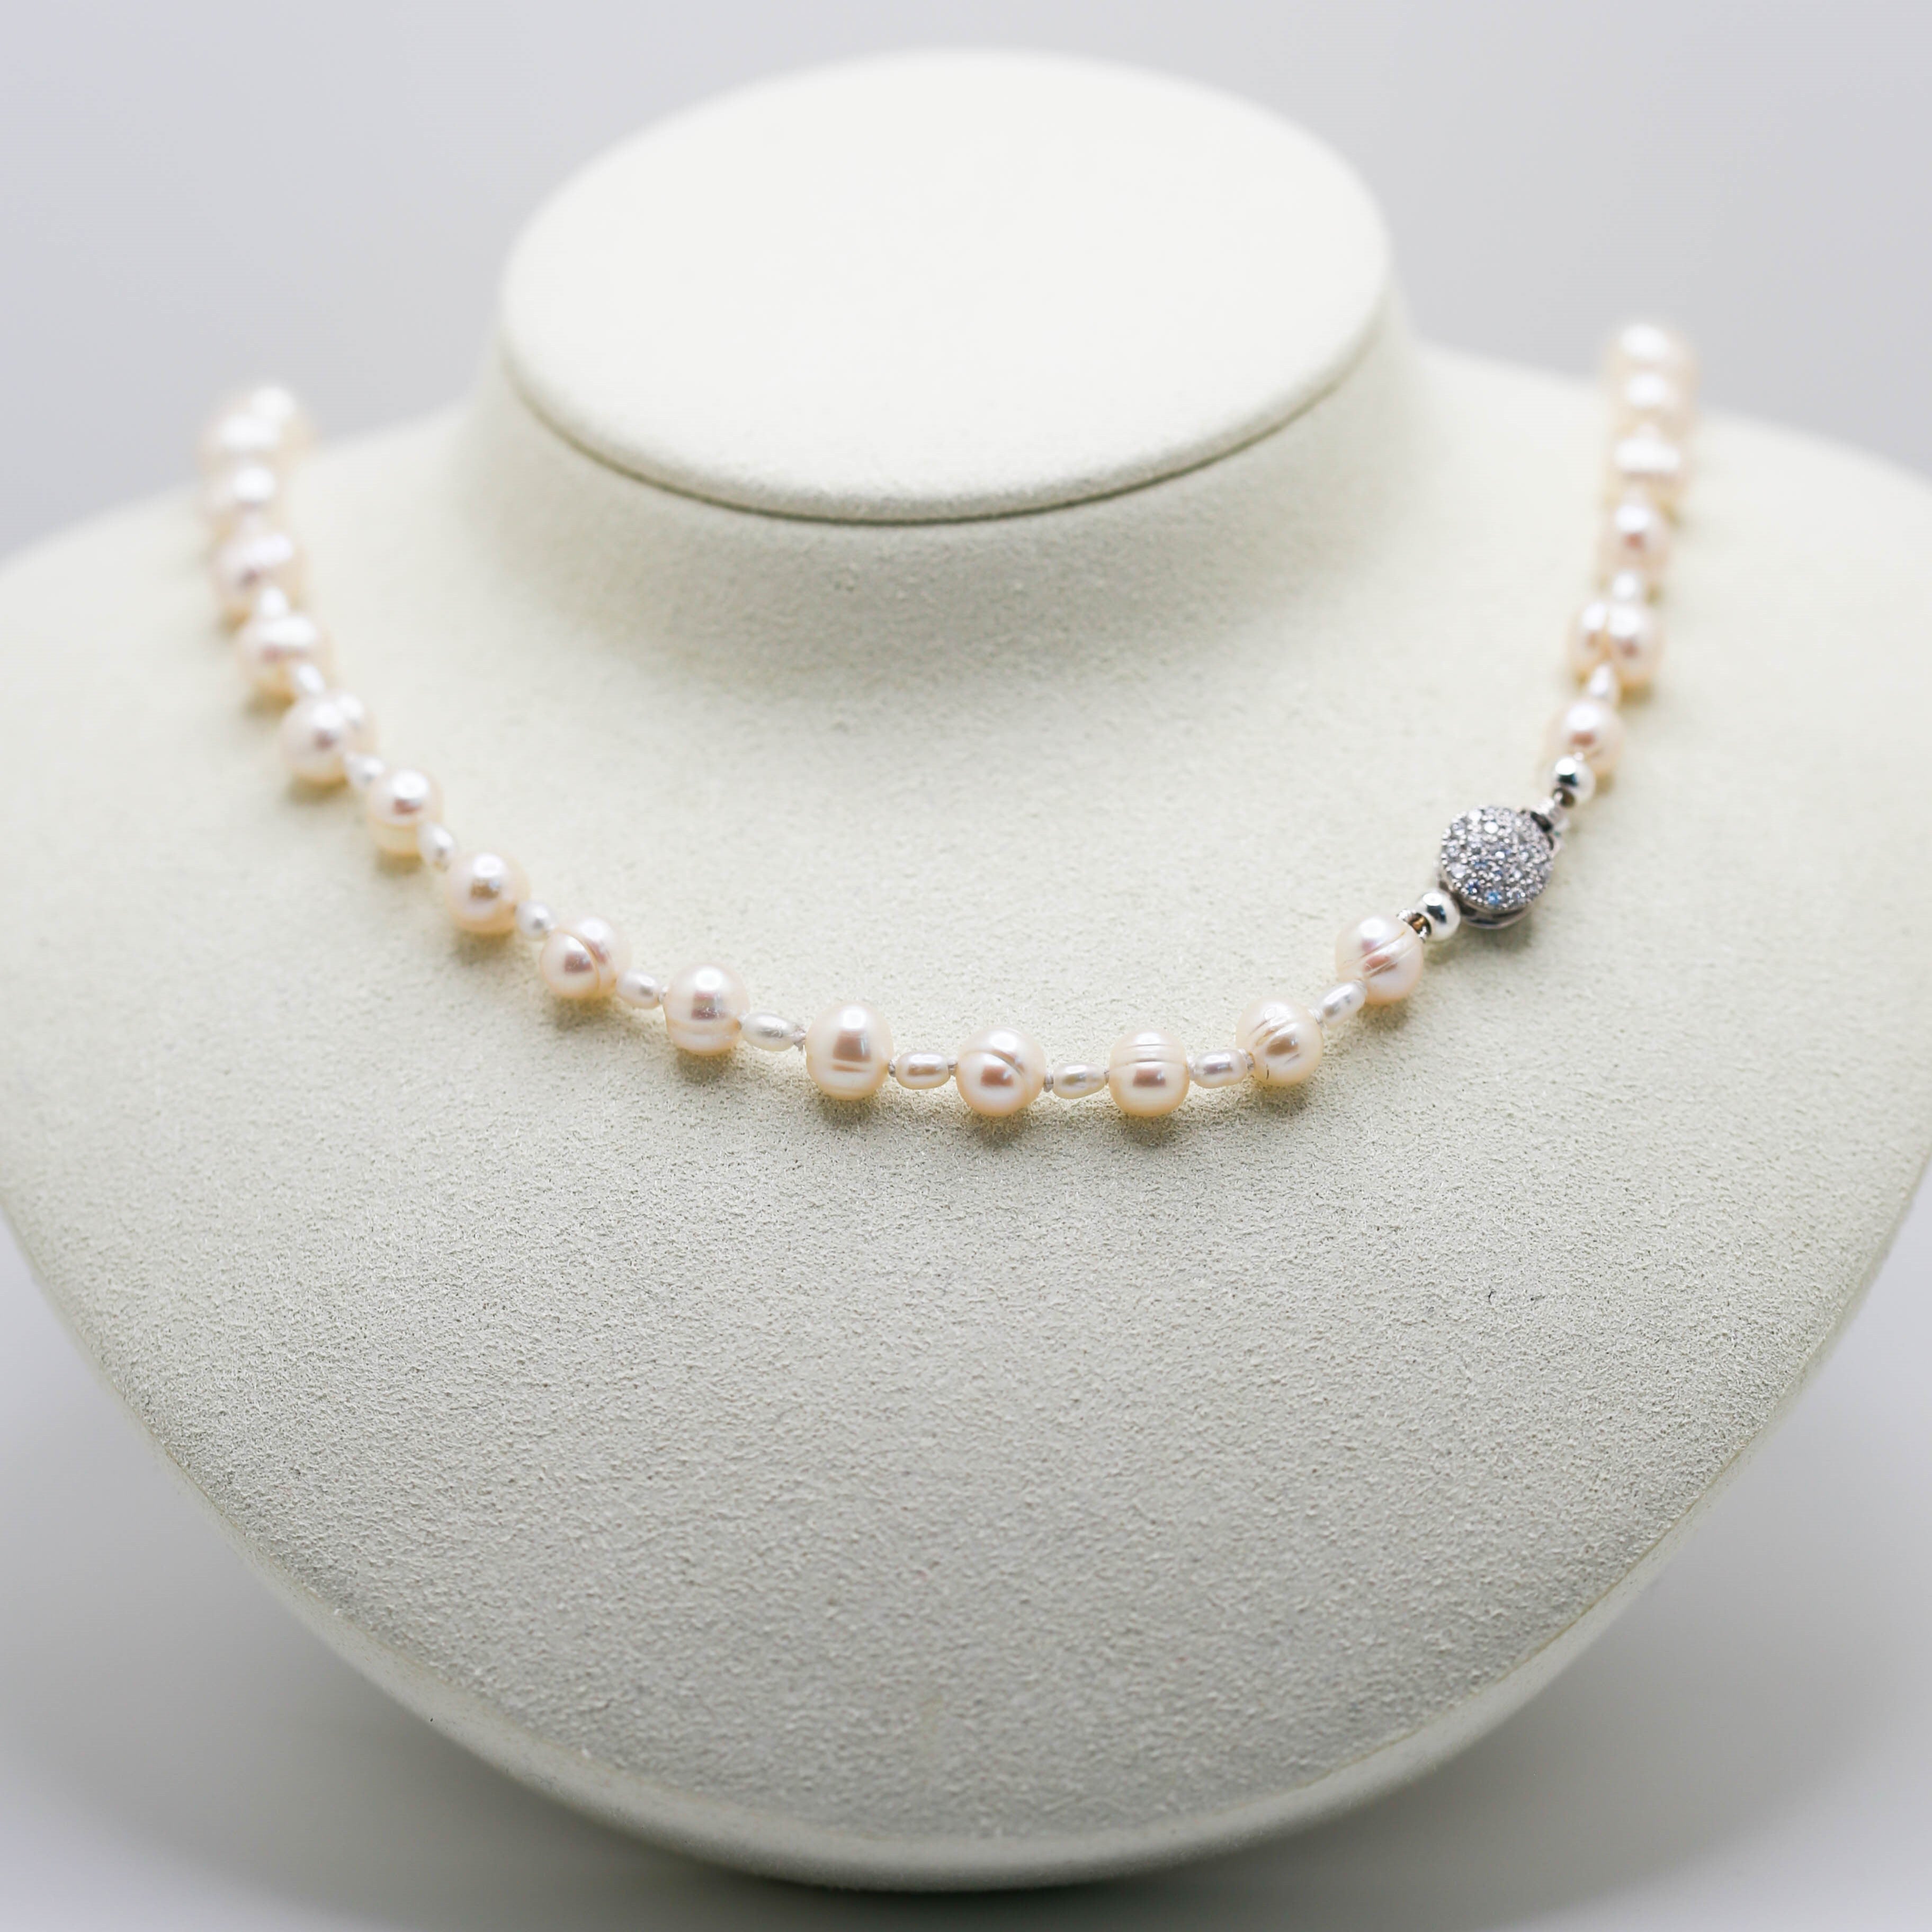 pearls and diamonds necklace